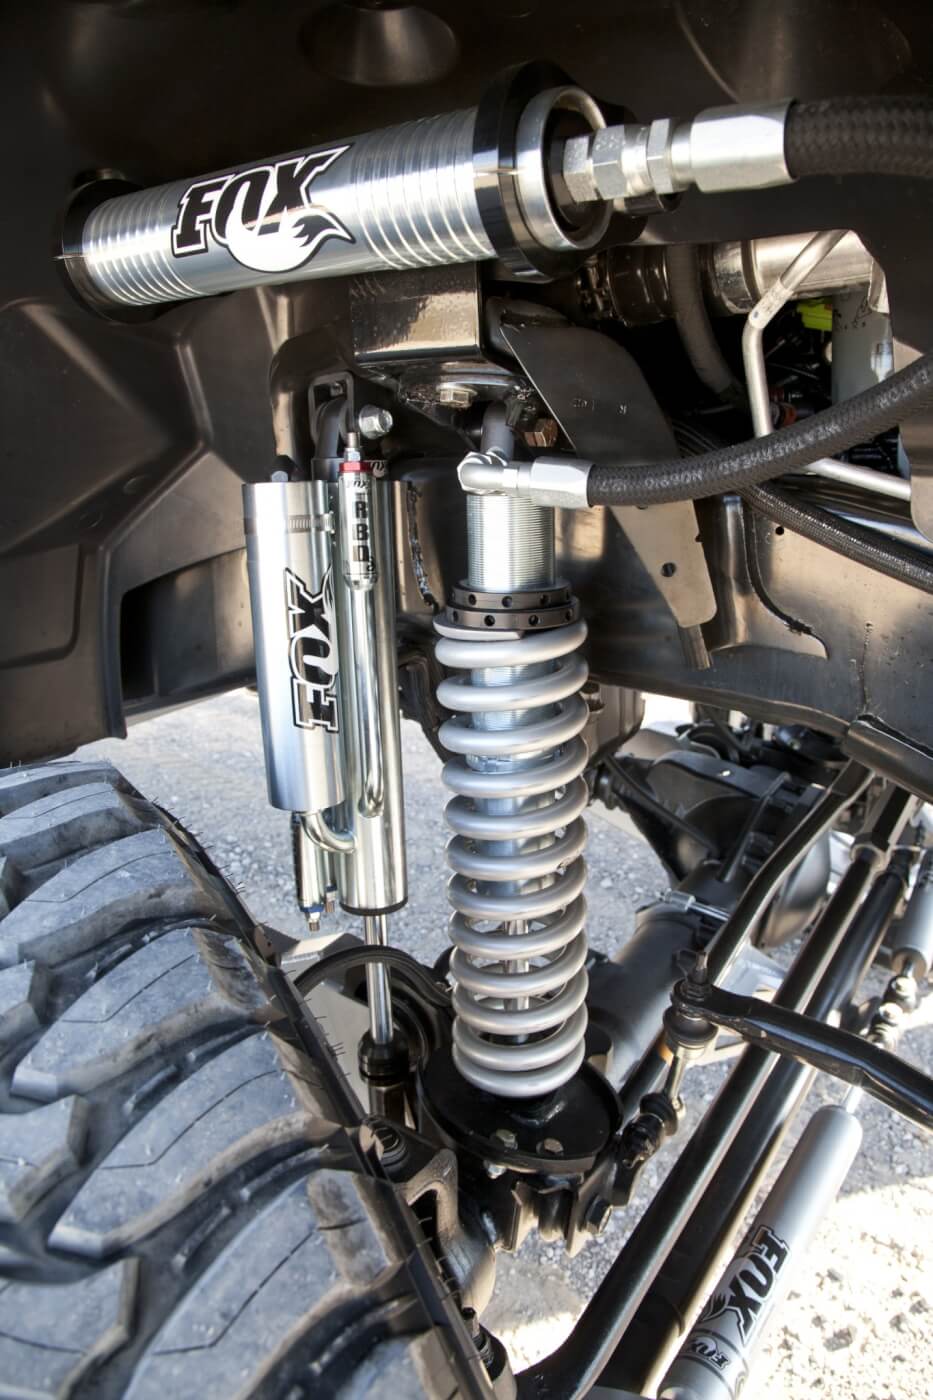 The front OEM struts have been upgraded to a set of Fox 2.5 coil-over shocks with remote reservoir and Eibach springs. In addition to these, a set of Fox piggy back, 3-tube bypass 2.5 shocks also help to smooth the ride, on and off the pavement. 